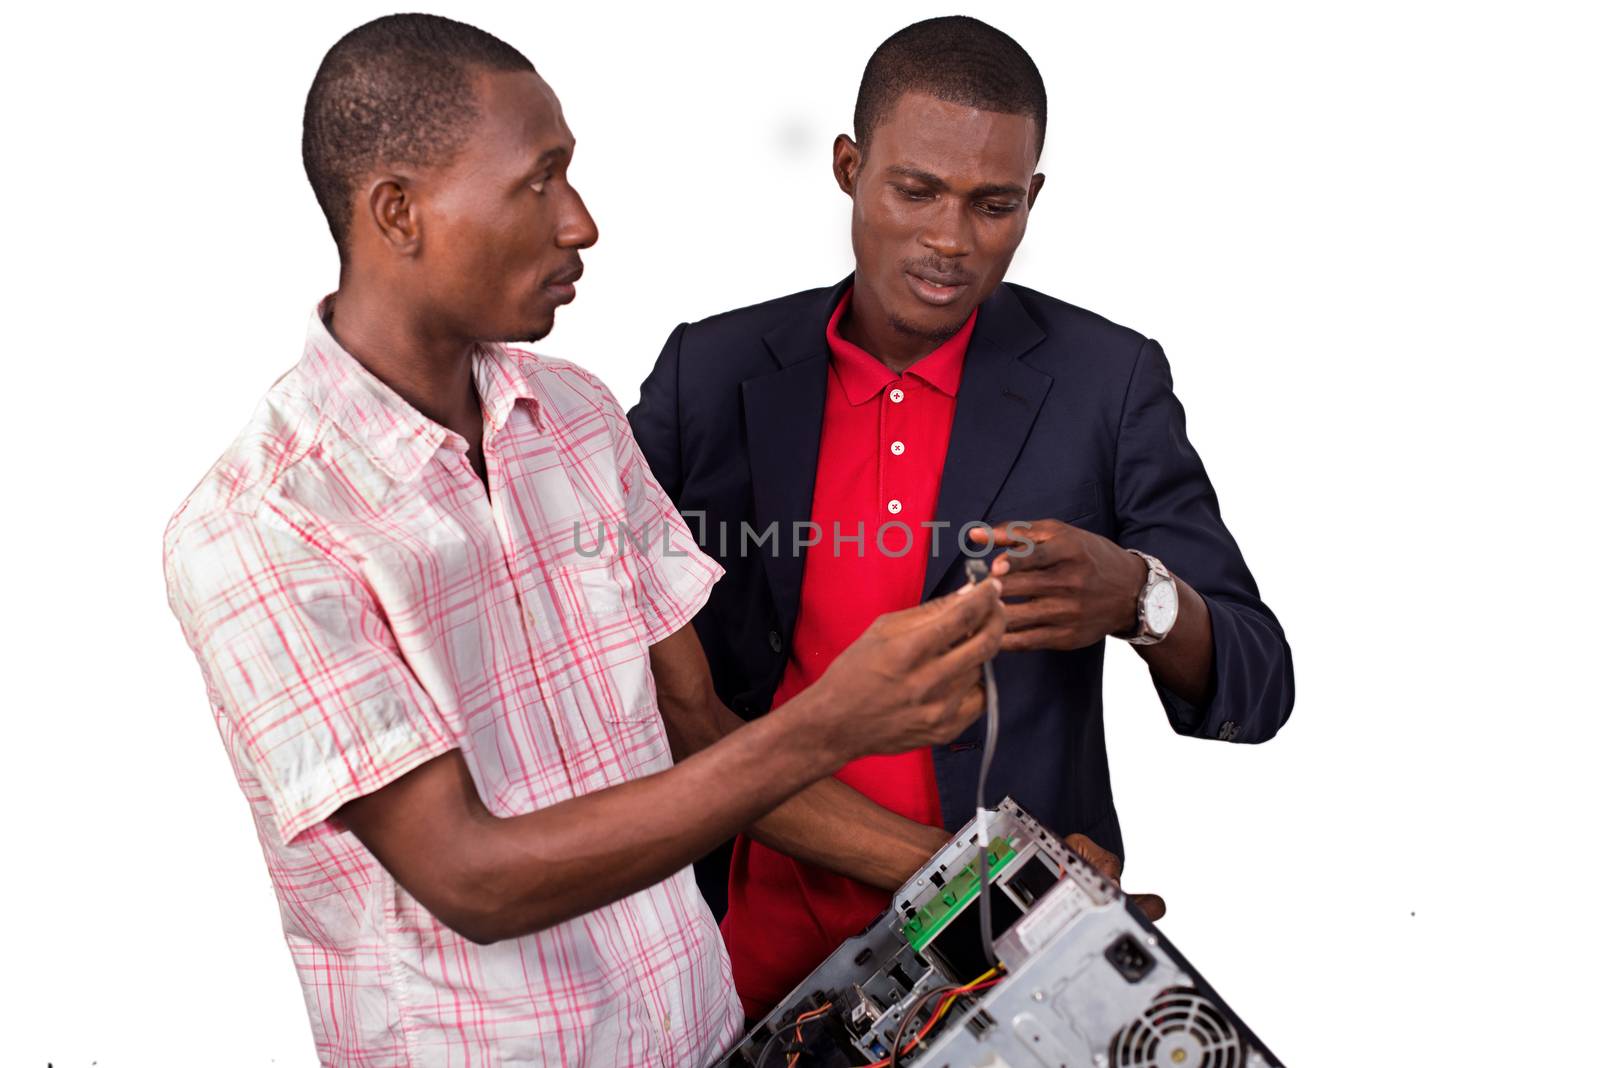 Technician repairing a computer in an office in front of his boss